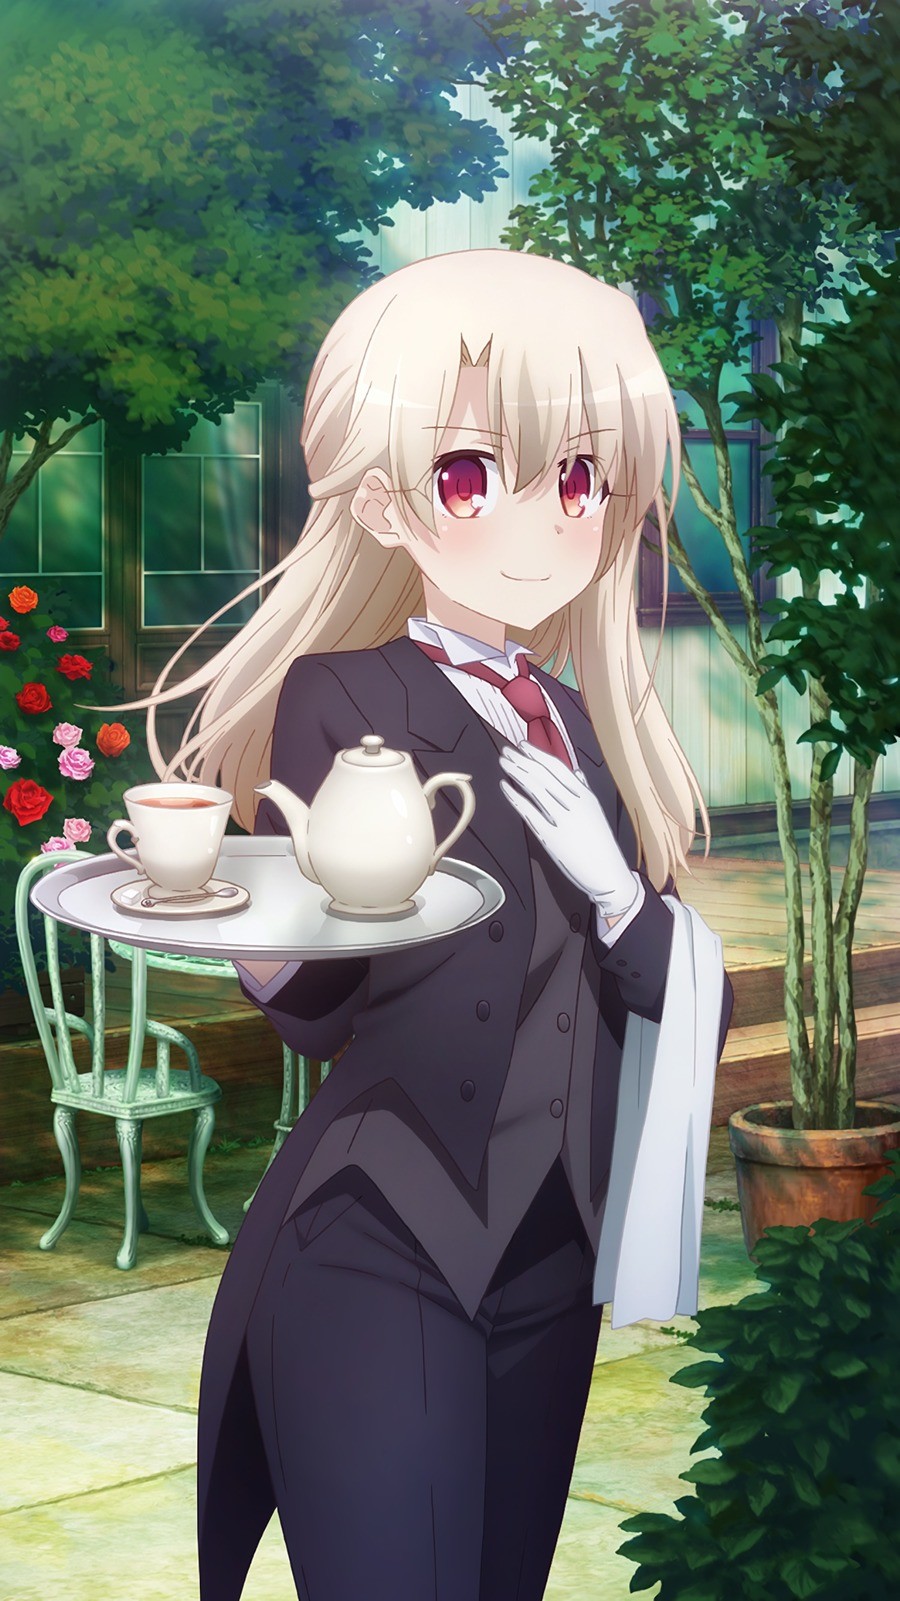 butlers. join list: SplendidServants (591 subs)Mention History join list:. I like how you suckered me in with a cute anime girl, then made half of them buff sexy men so now I have a half chub over men and that's gay.